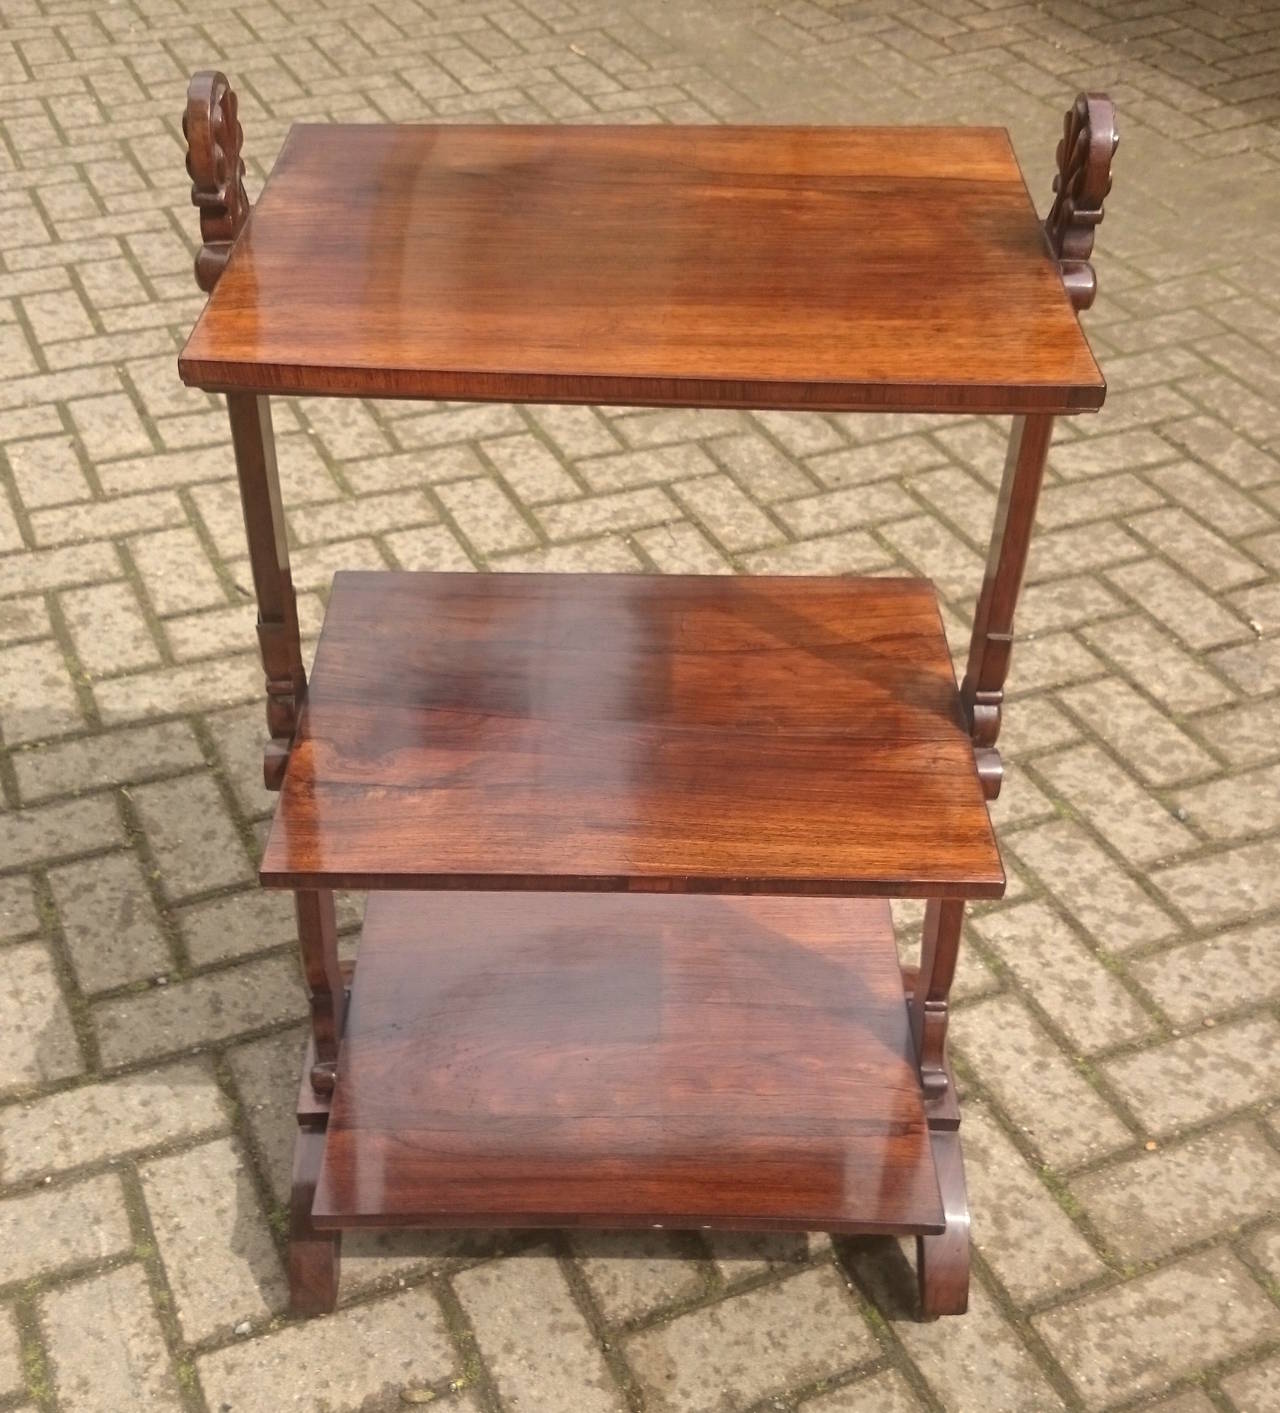 19th Century Beautiful and Delicate Little Regency Rosewood Whatnot